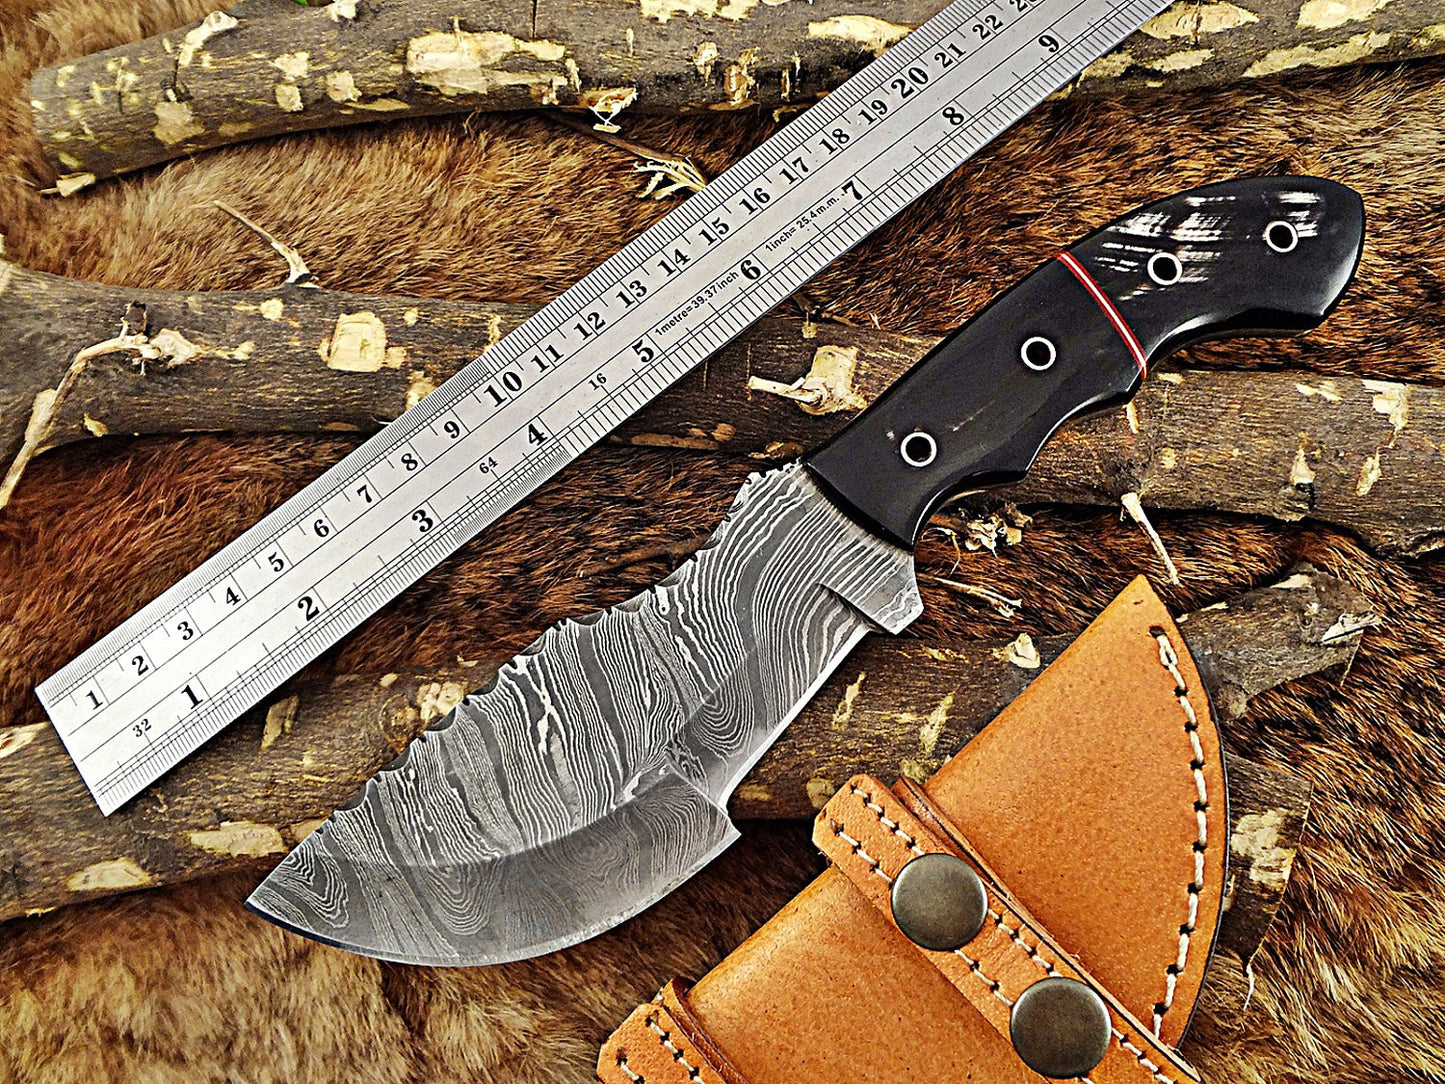 10" Long Damascus steel tracker knife hand forged twist pattern full tang, 2 tone bull horn with holes scale, Cow hide leather sheath